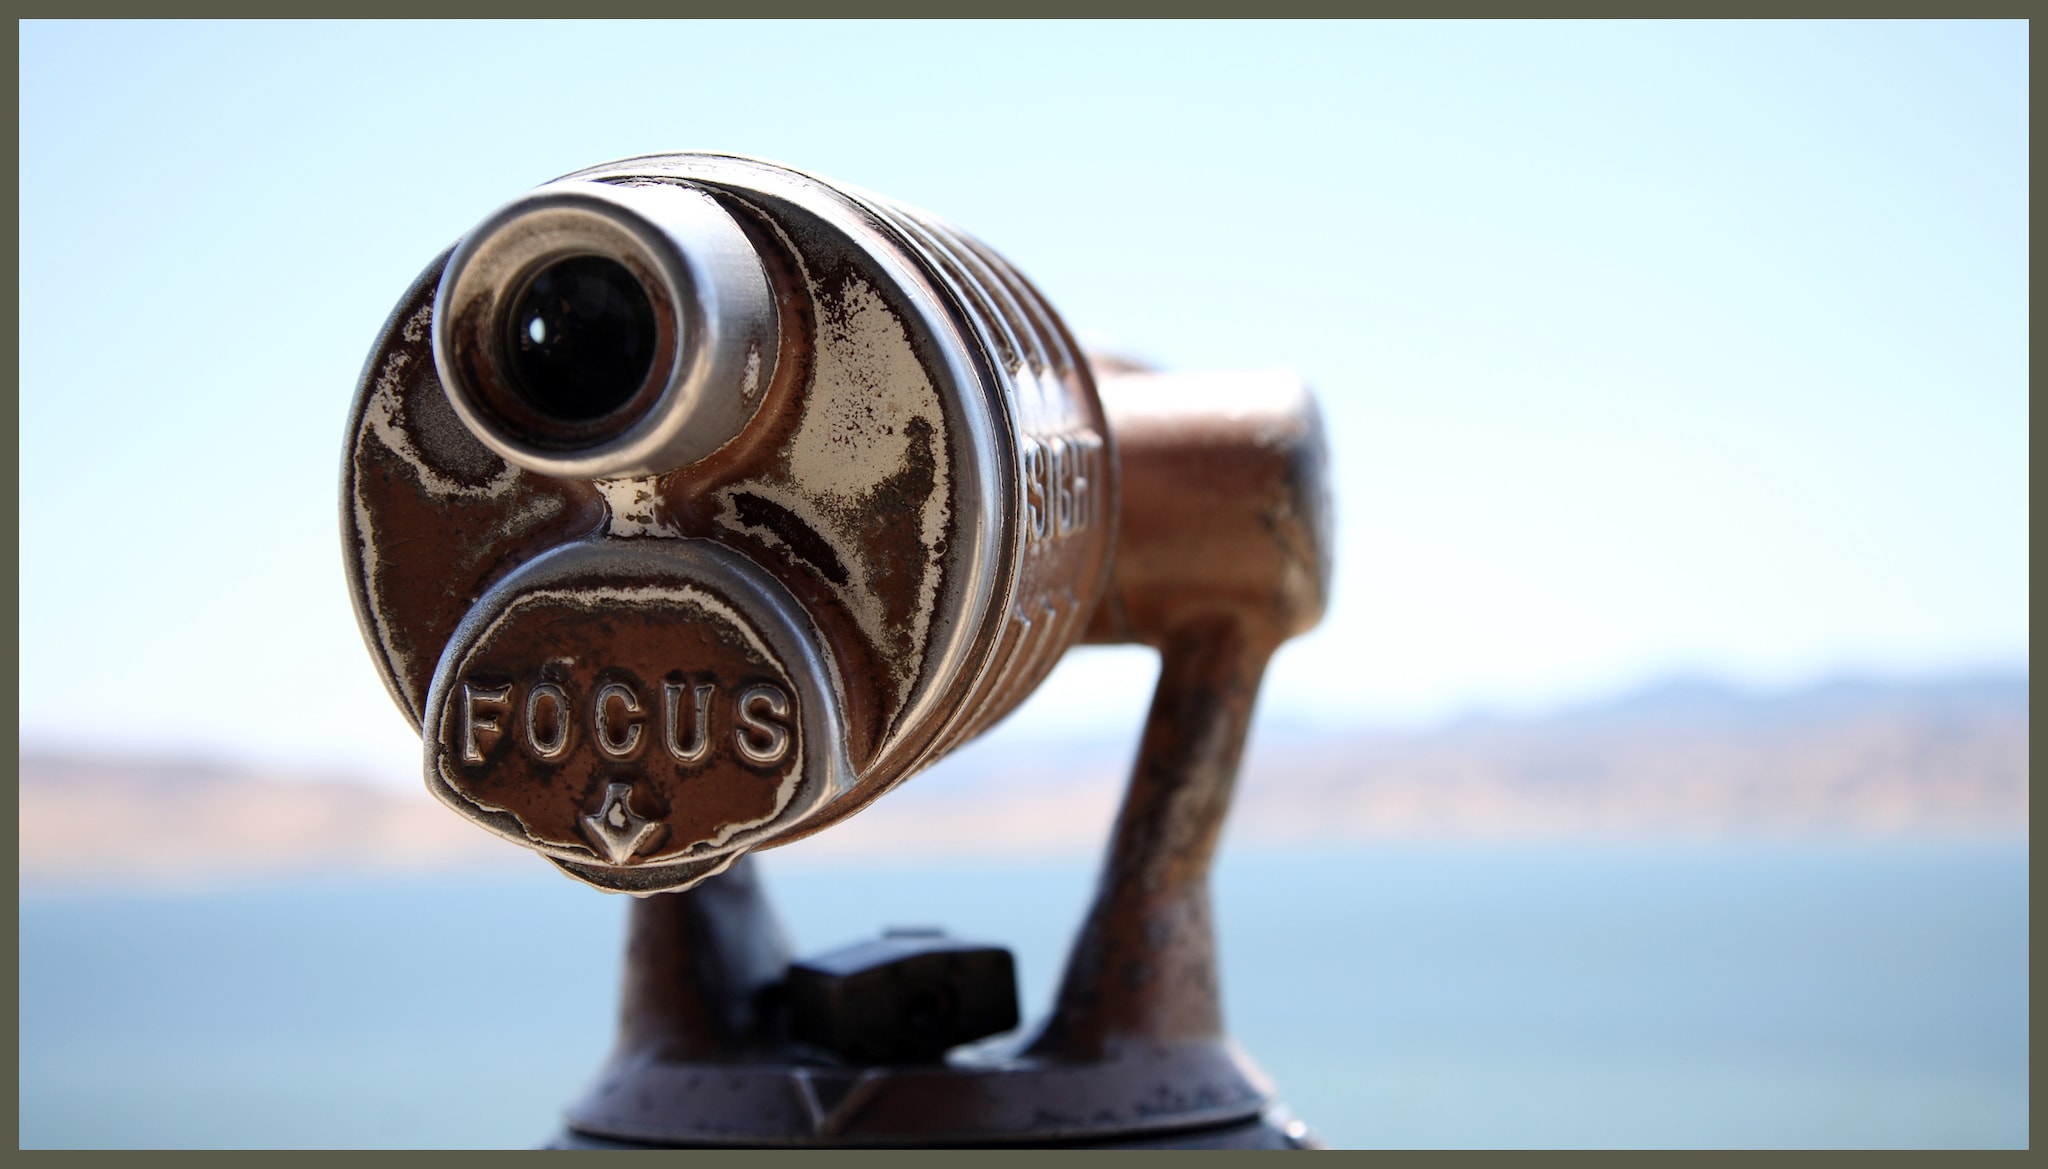 Telescope in foreground with mountain and ocean scenery in background blurred out. View of telescope is where you put your eye to look through and the word focus is shown.